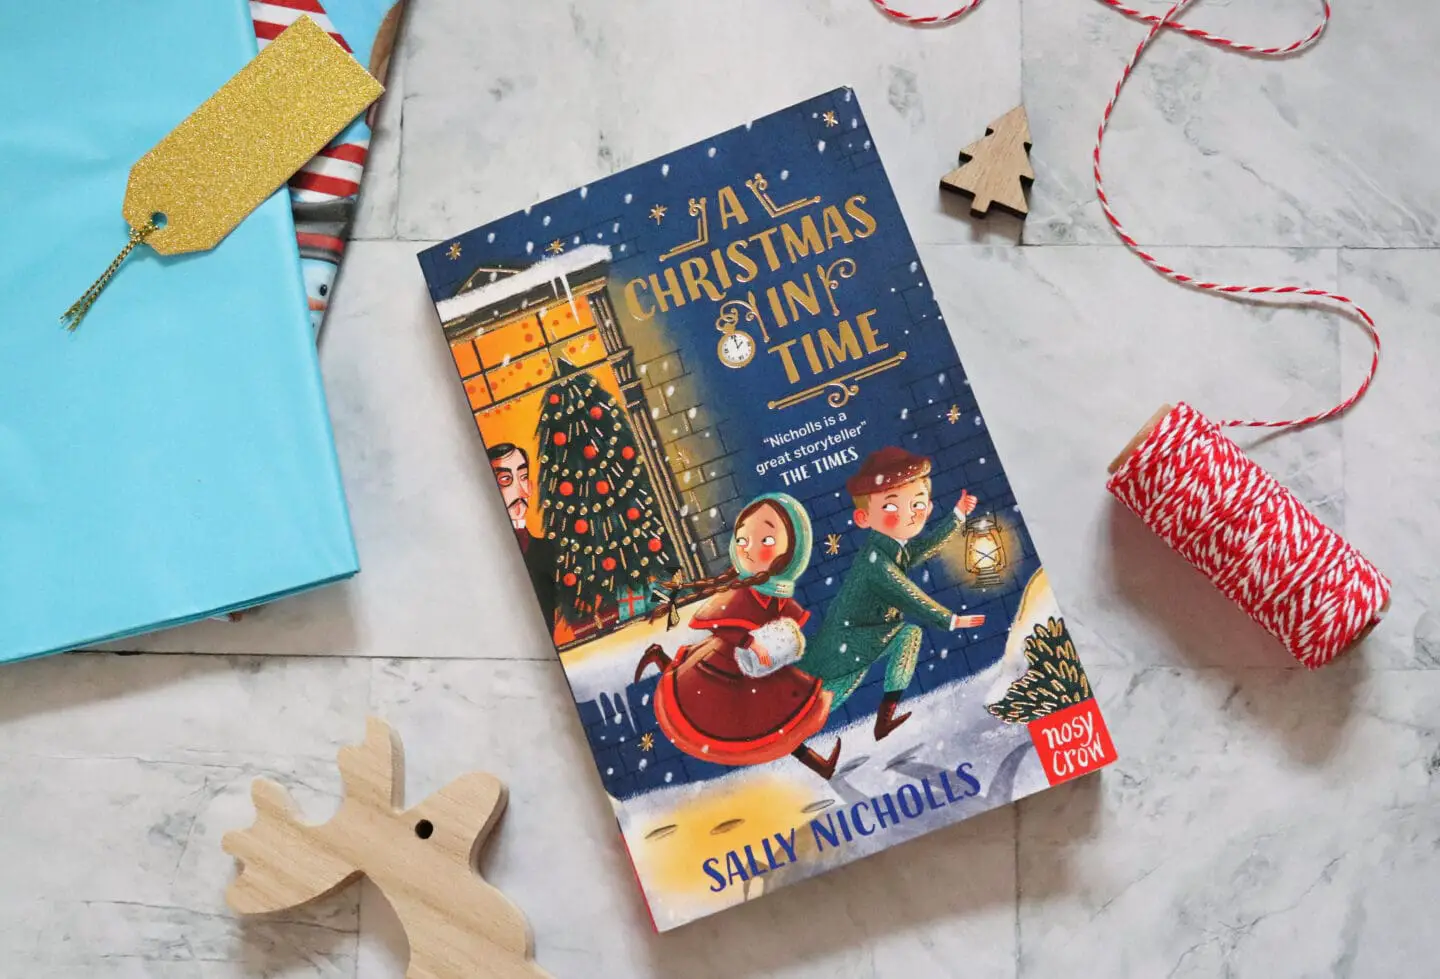 A Christmas in time by Sally Nicholls Christmas book